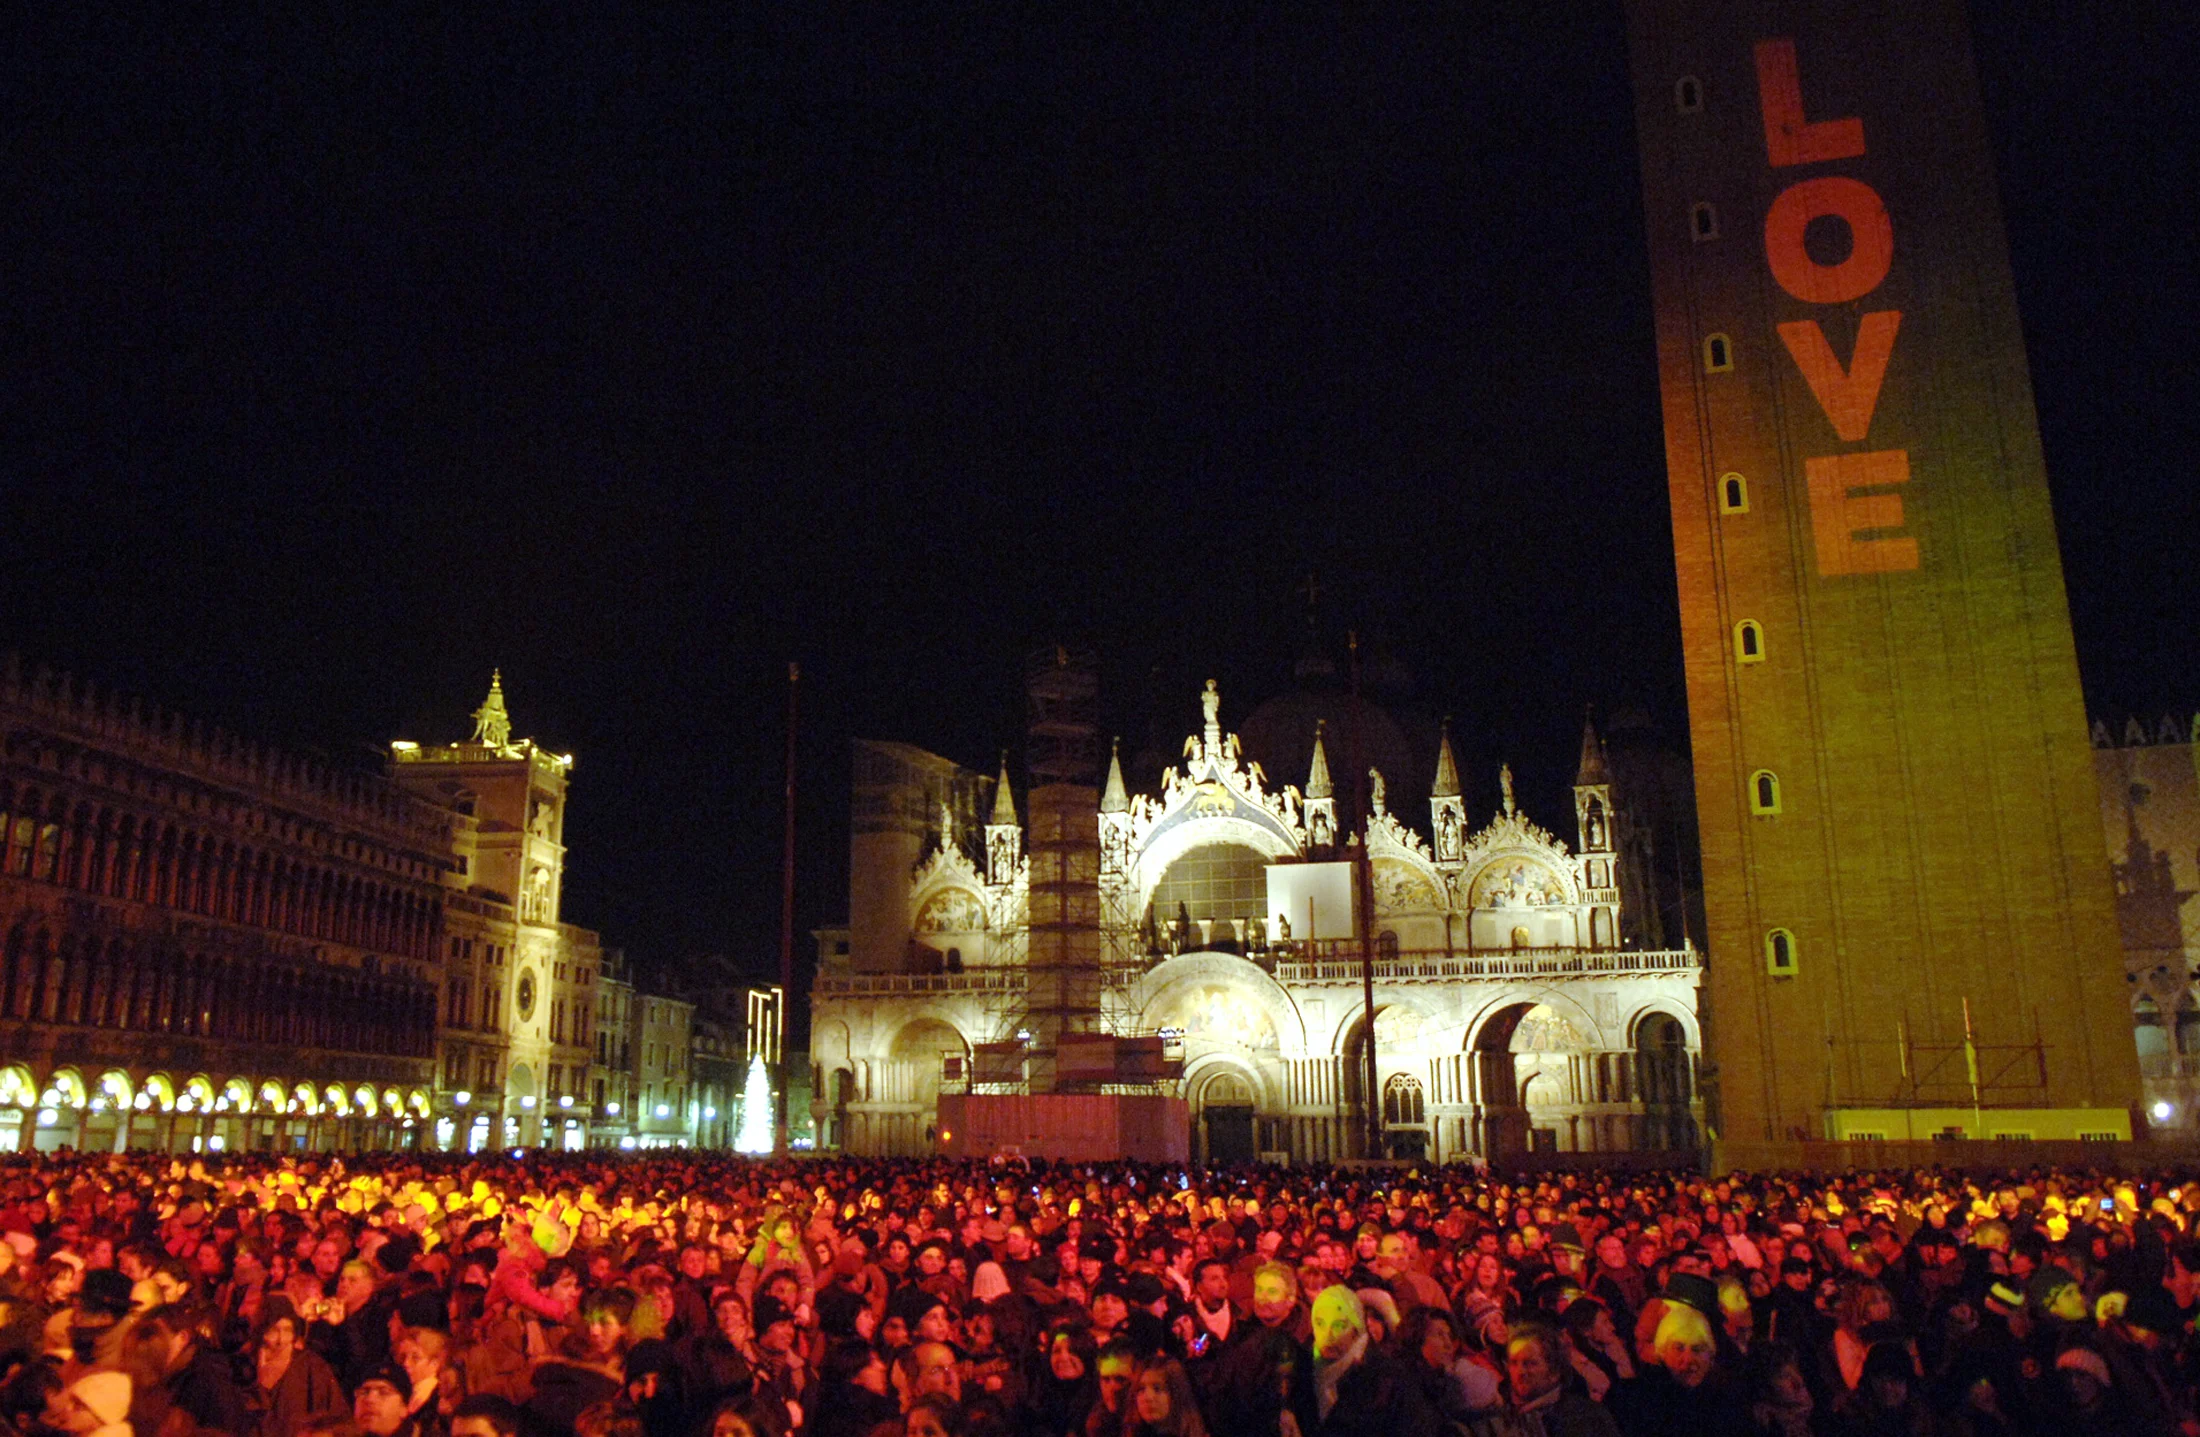 People Gather In Saint Mark's Square To Kiss During New Year's Eve Celebrations In Venice